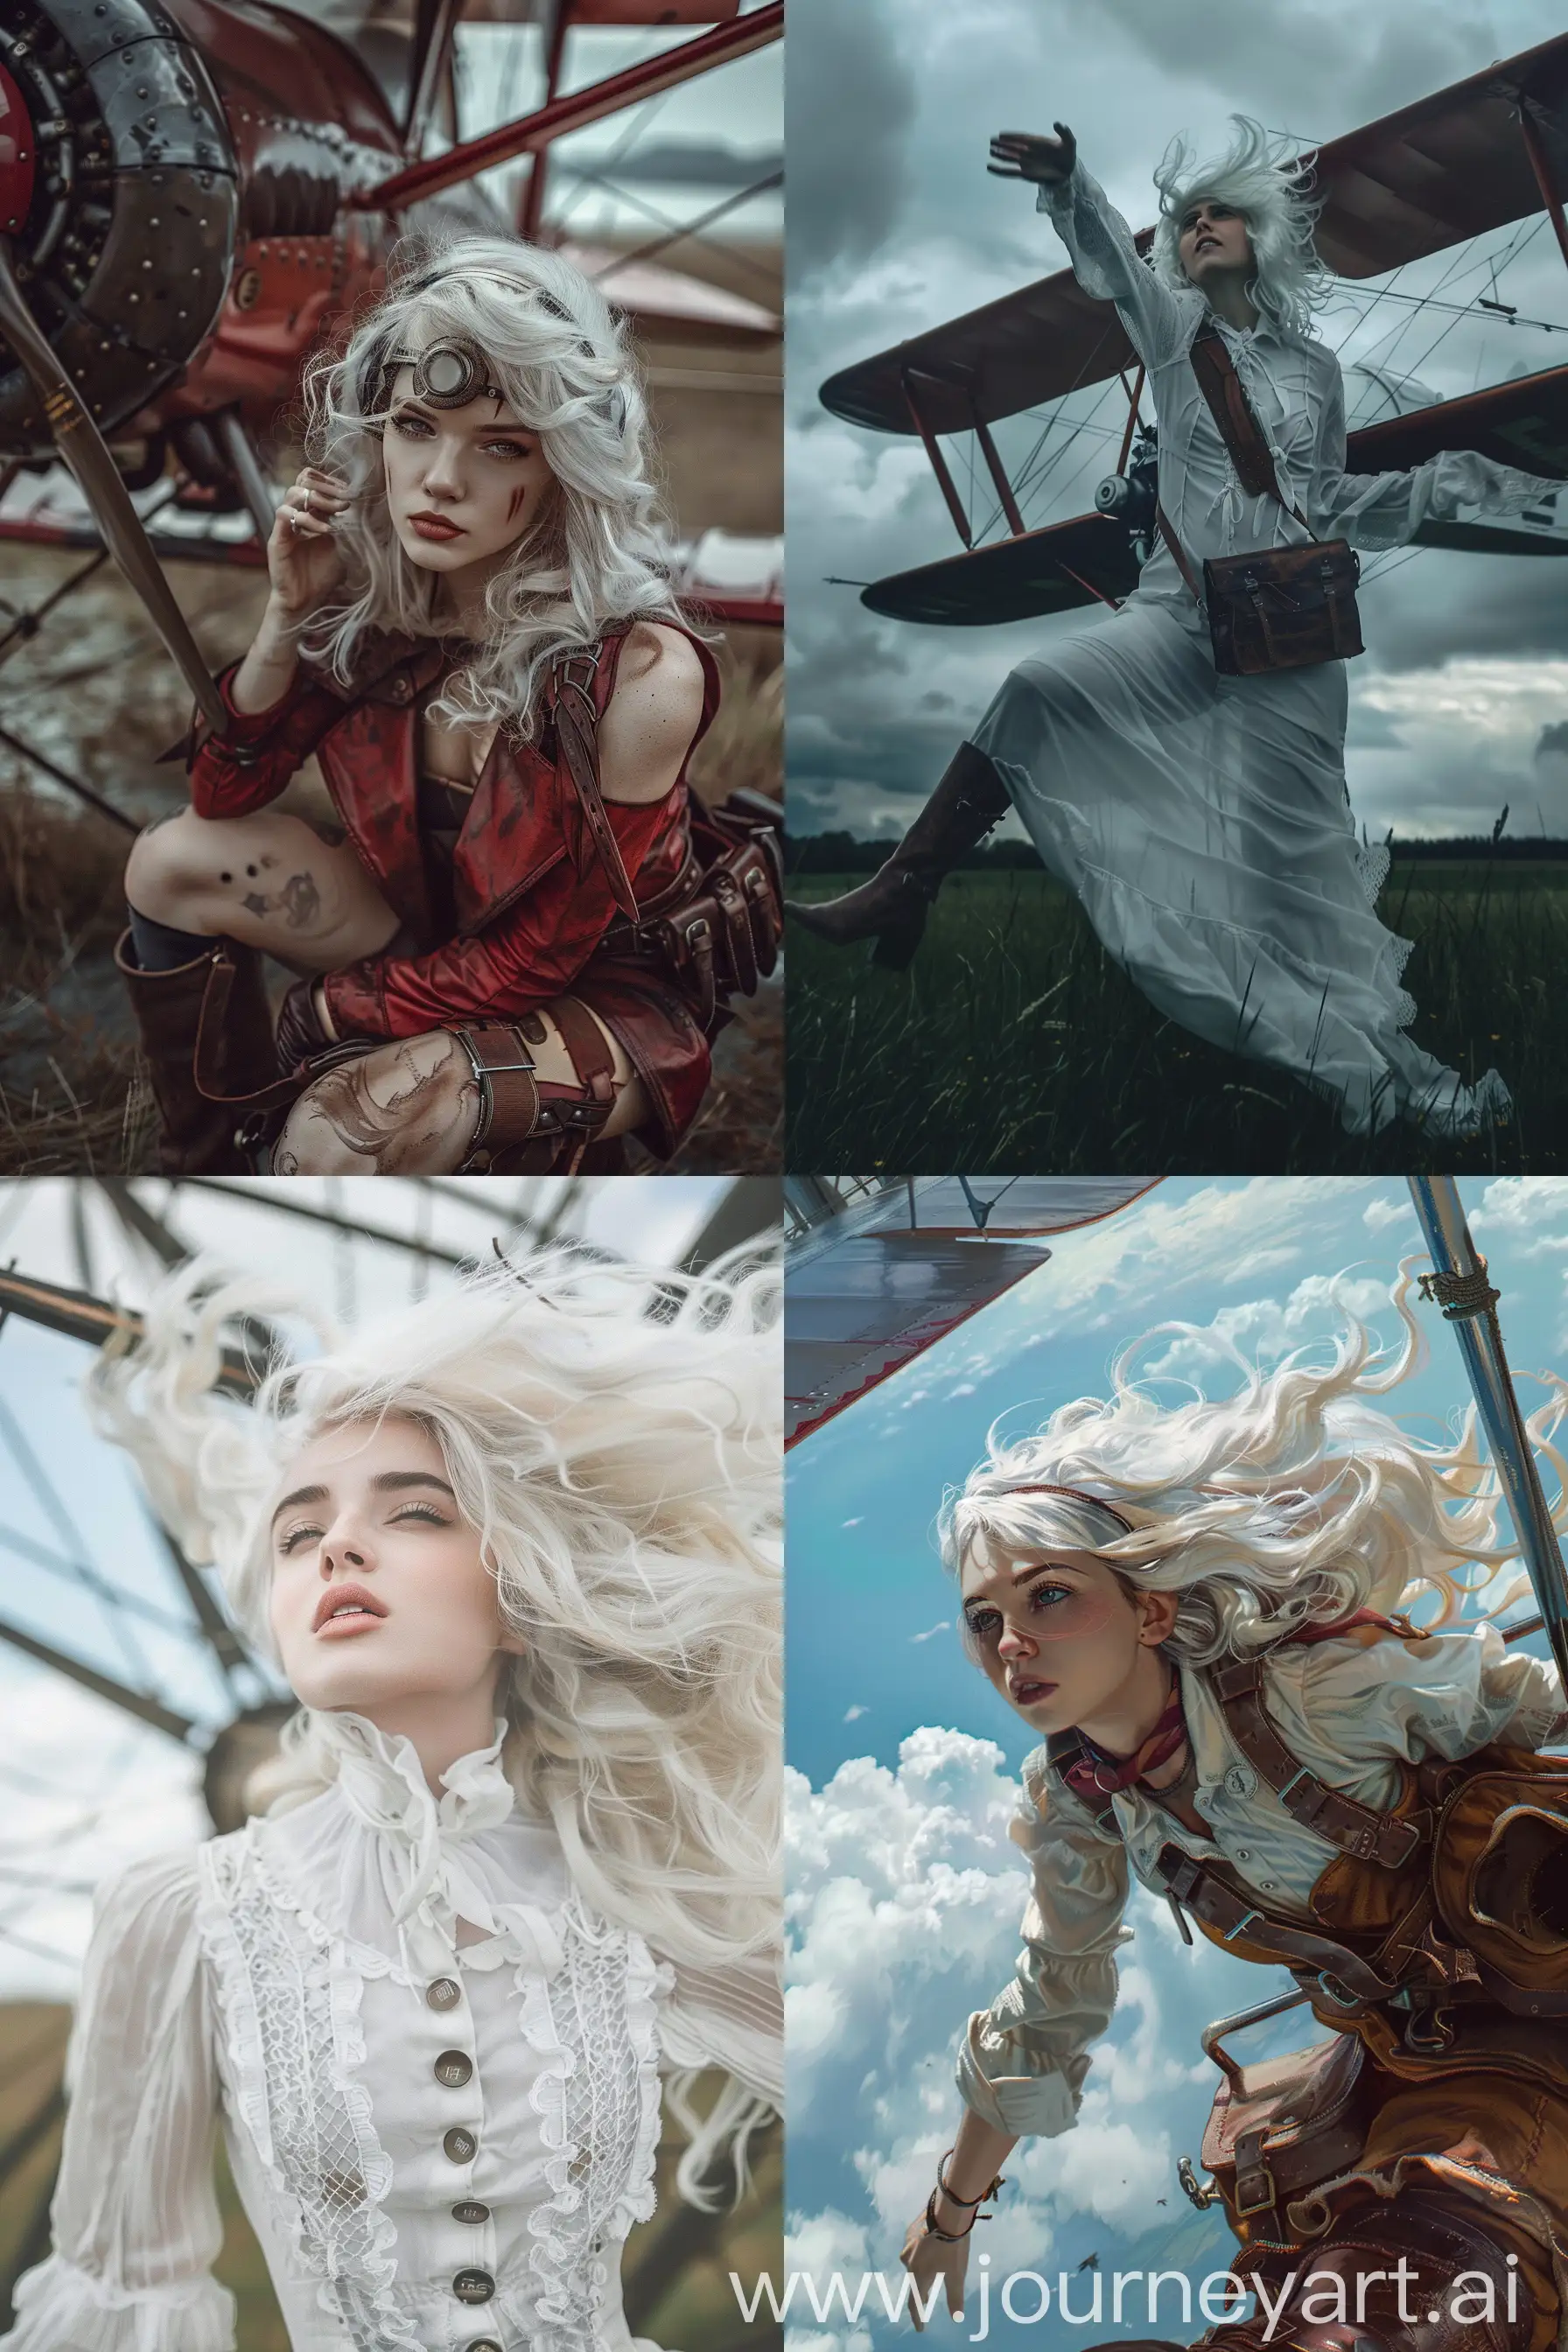 Graceful-Woman-with-Flowing-White-Hair-and-Vintage-Biplane-in-Windy-Embrace